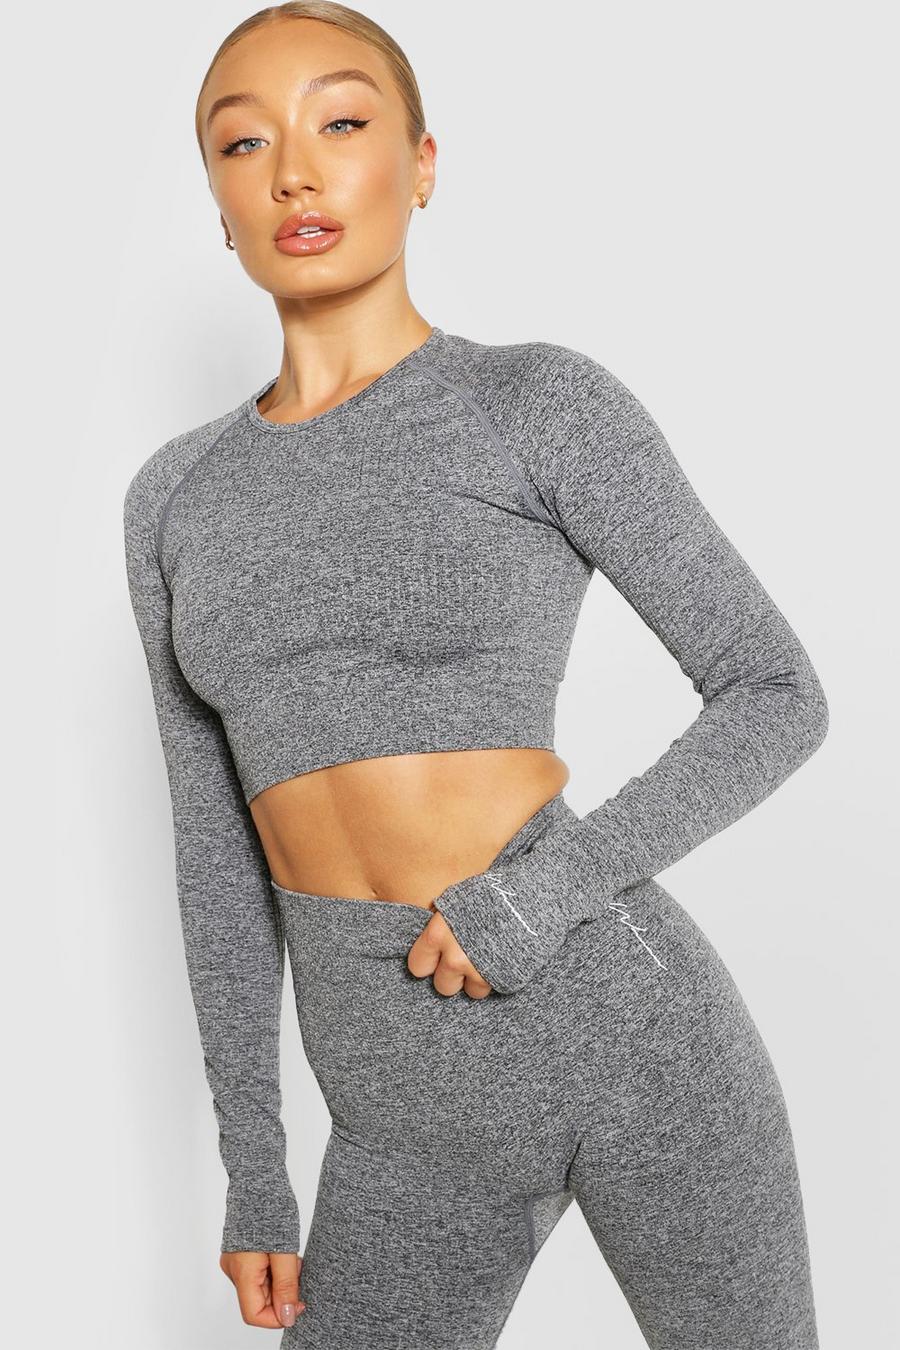  altiland Ribbed Long Sleeve Workout Tops for Women